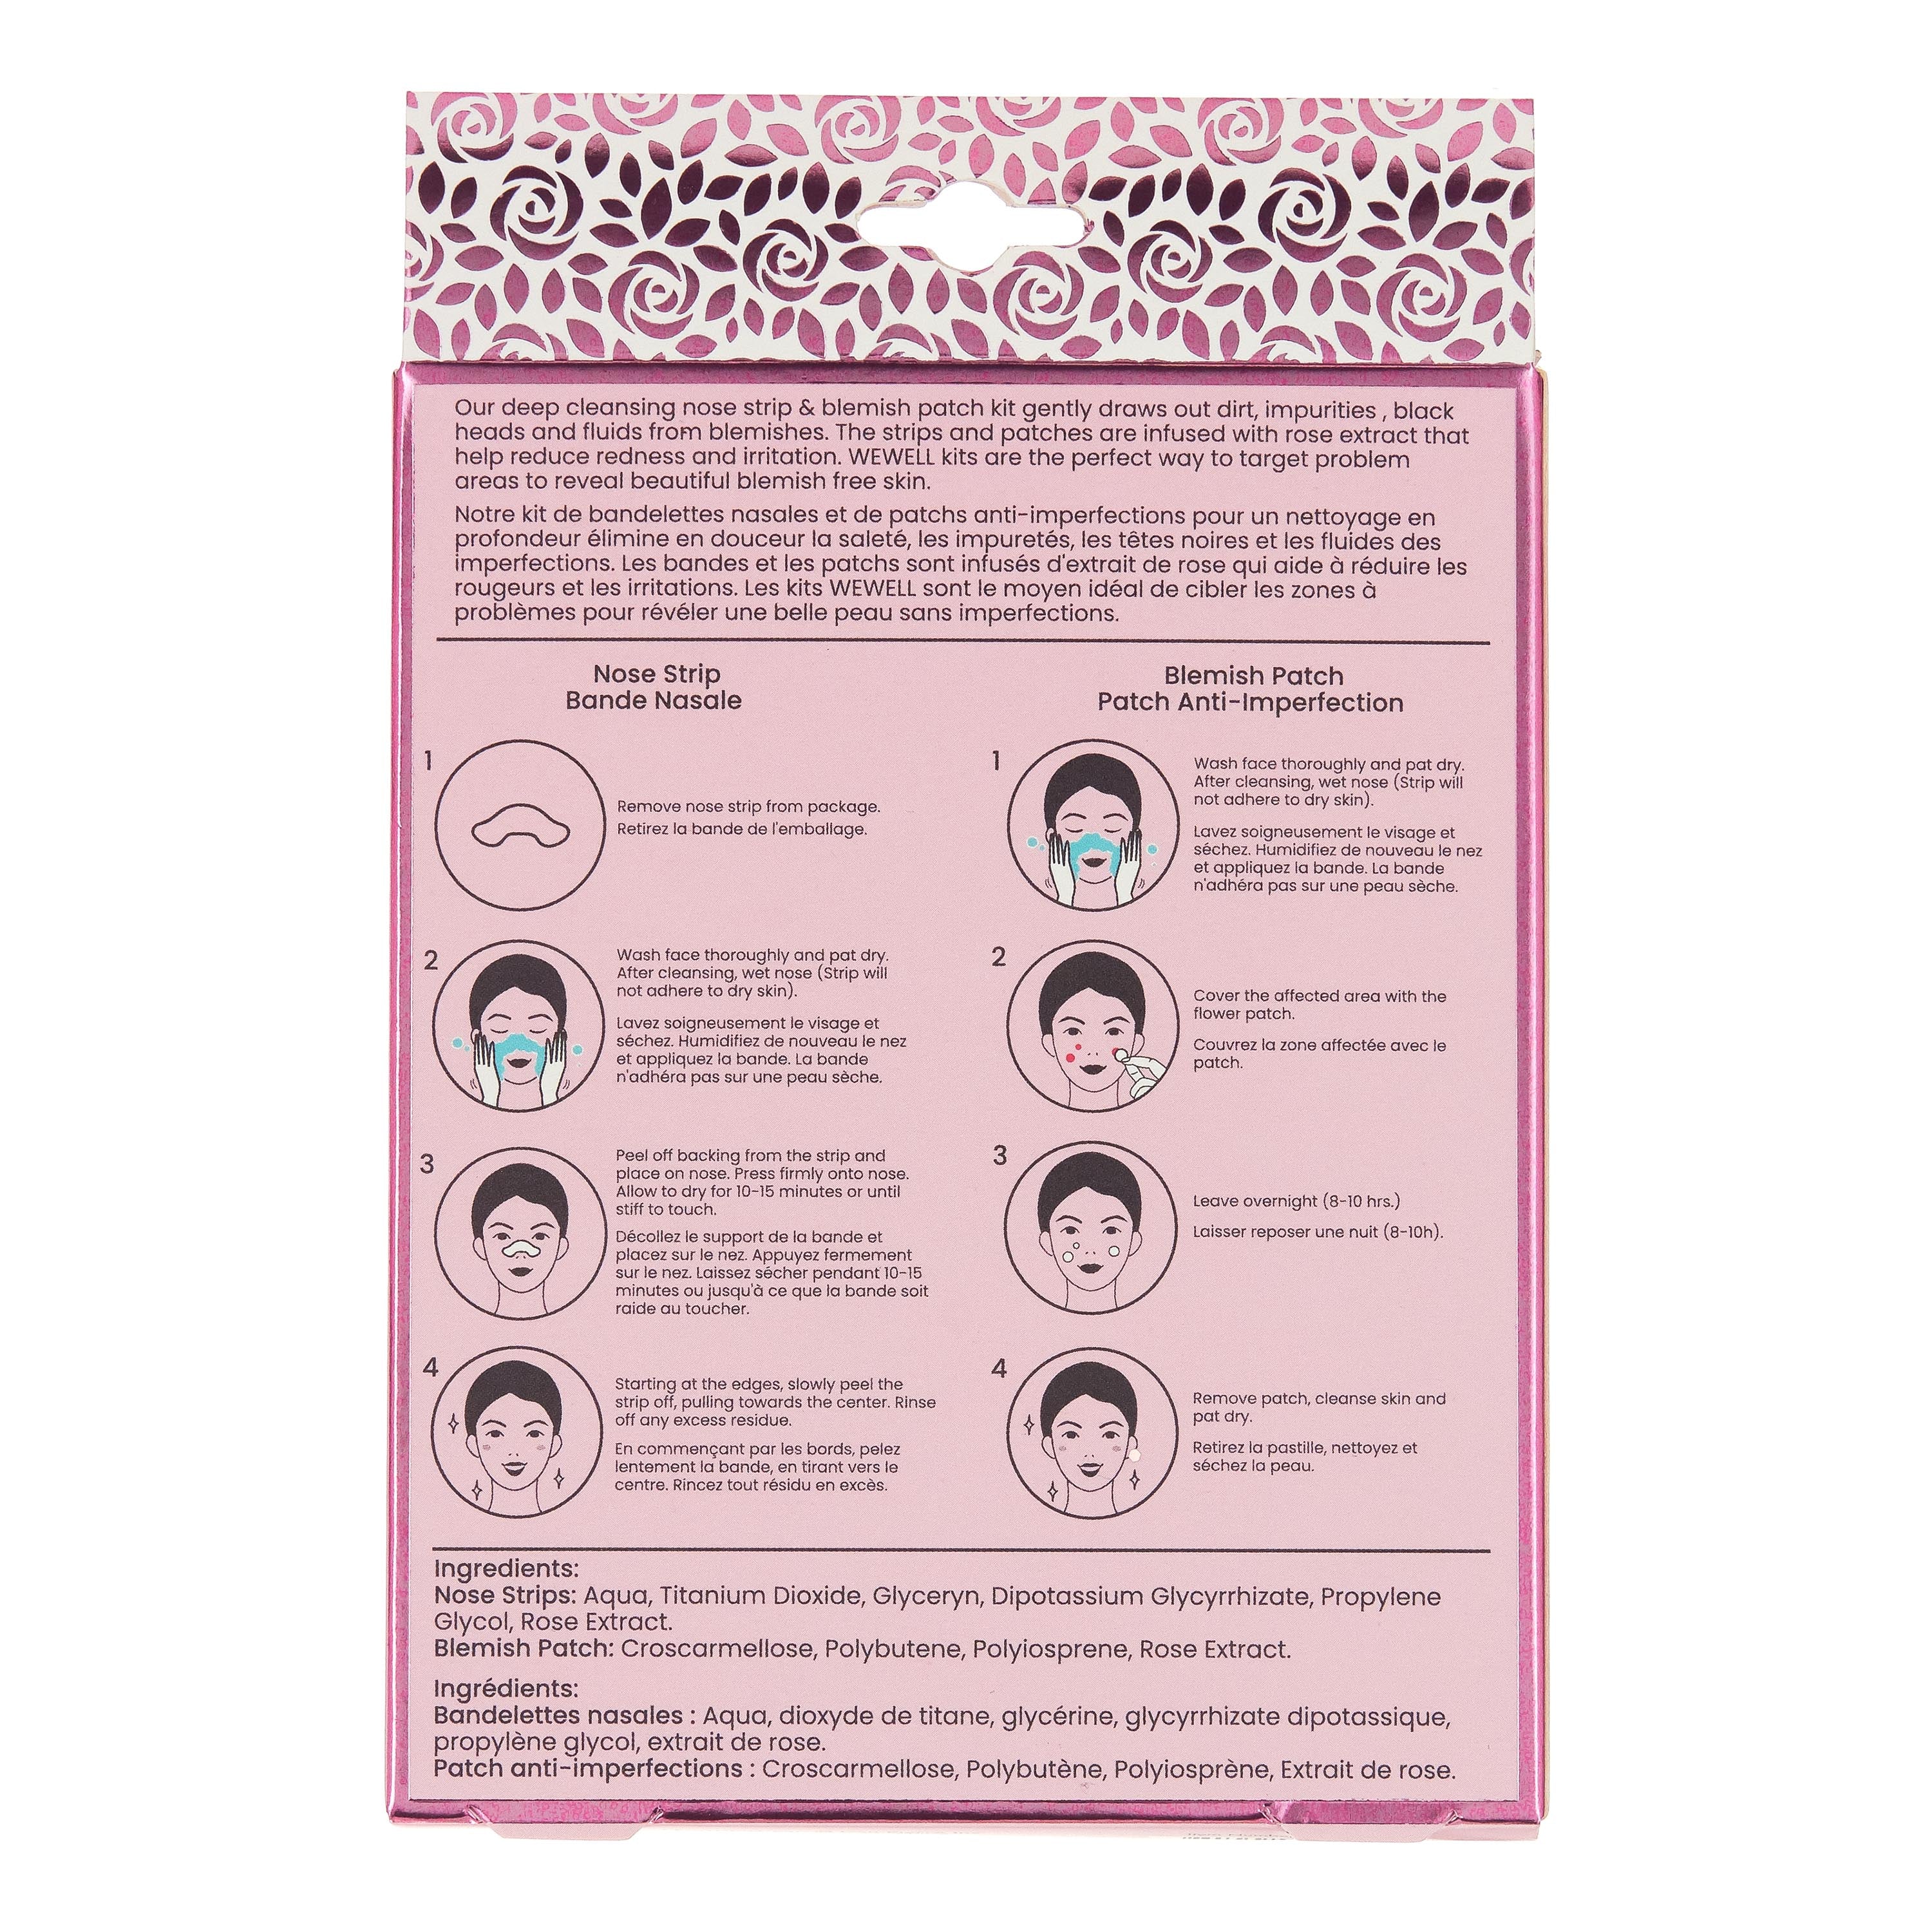 NOSE STRIP & BLEMISH PATCH KIT - ROSE EXTRACT